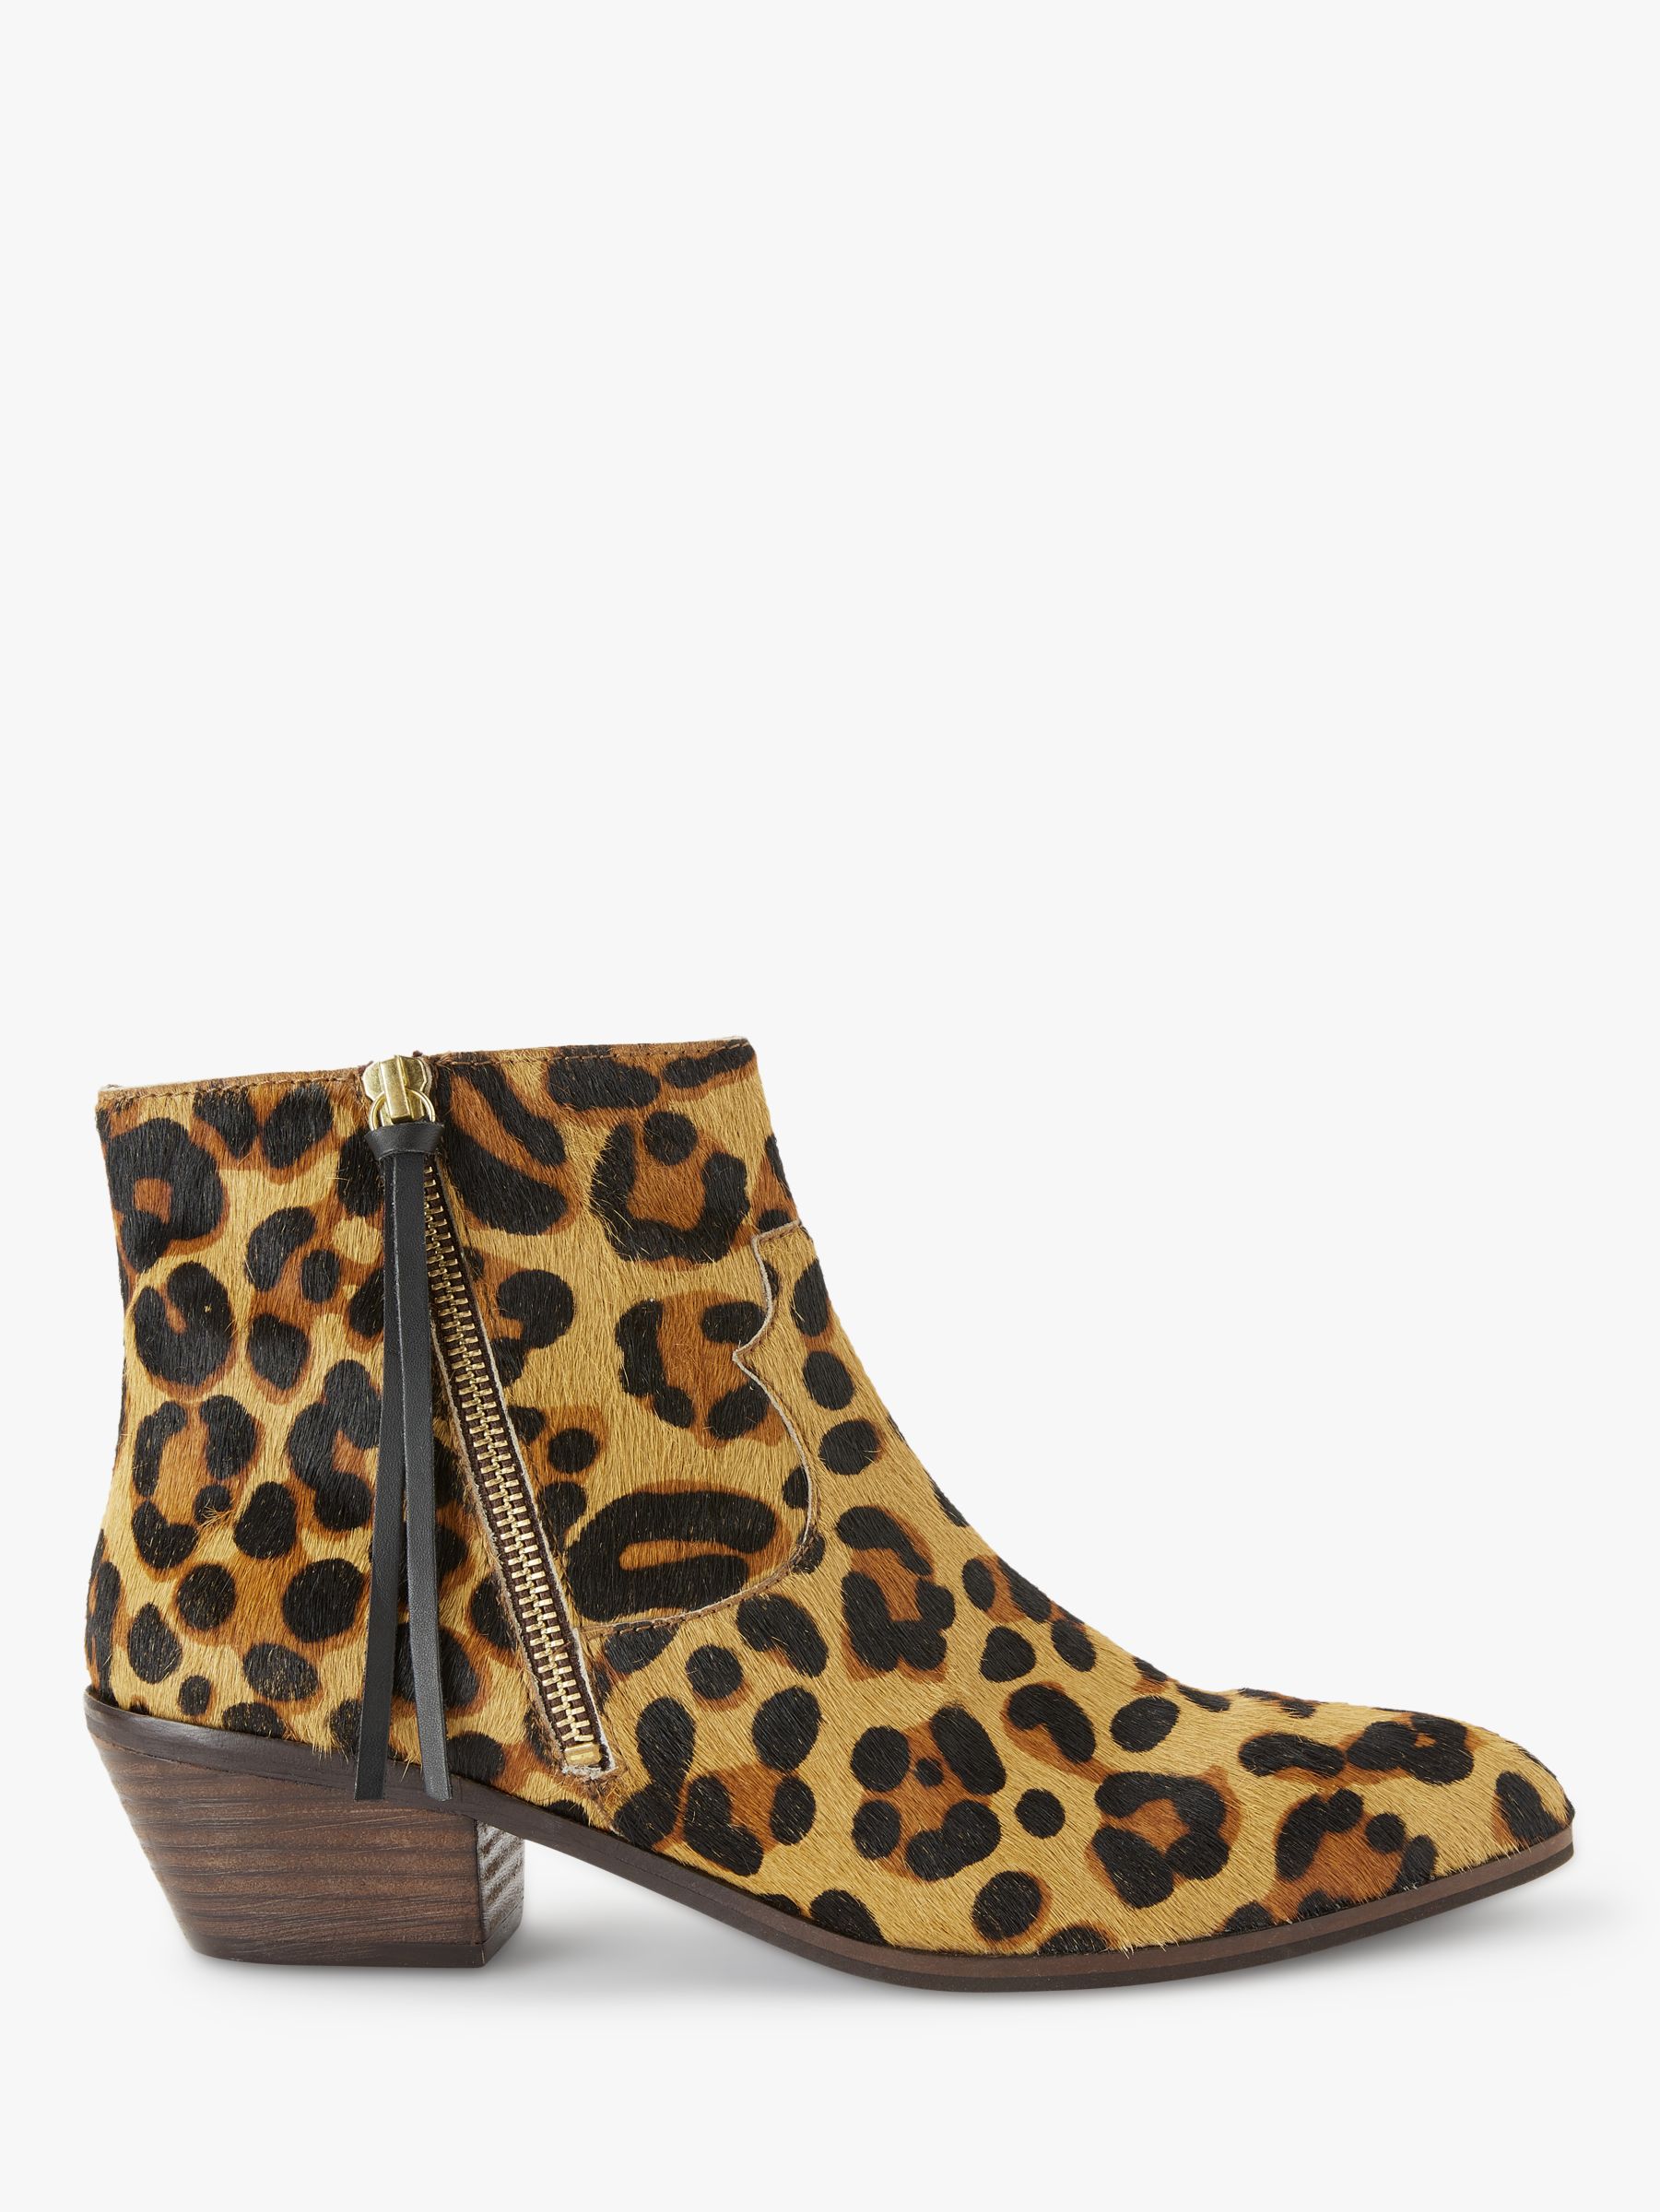 AND/OR Paquita Flat Heel Ankle Boots, Leopard at John Lewis & Partners